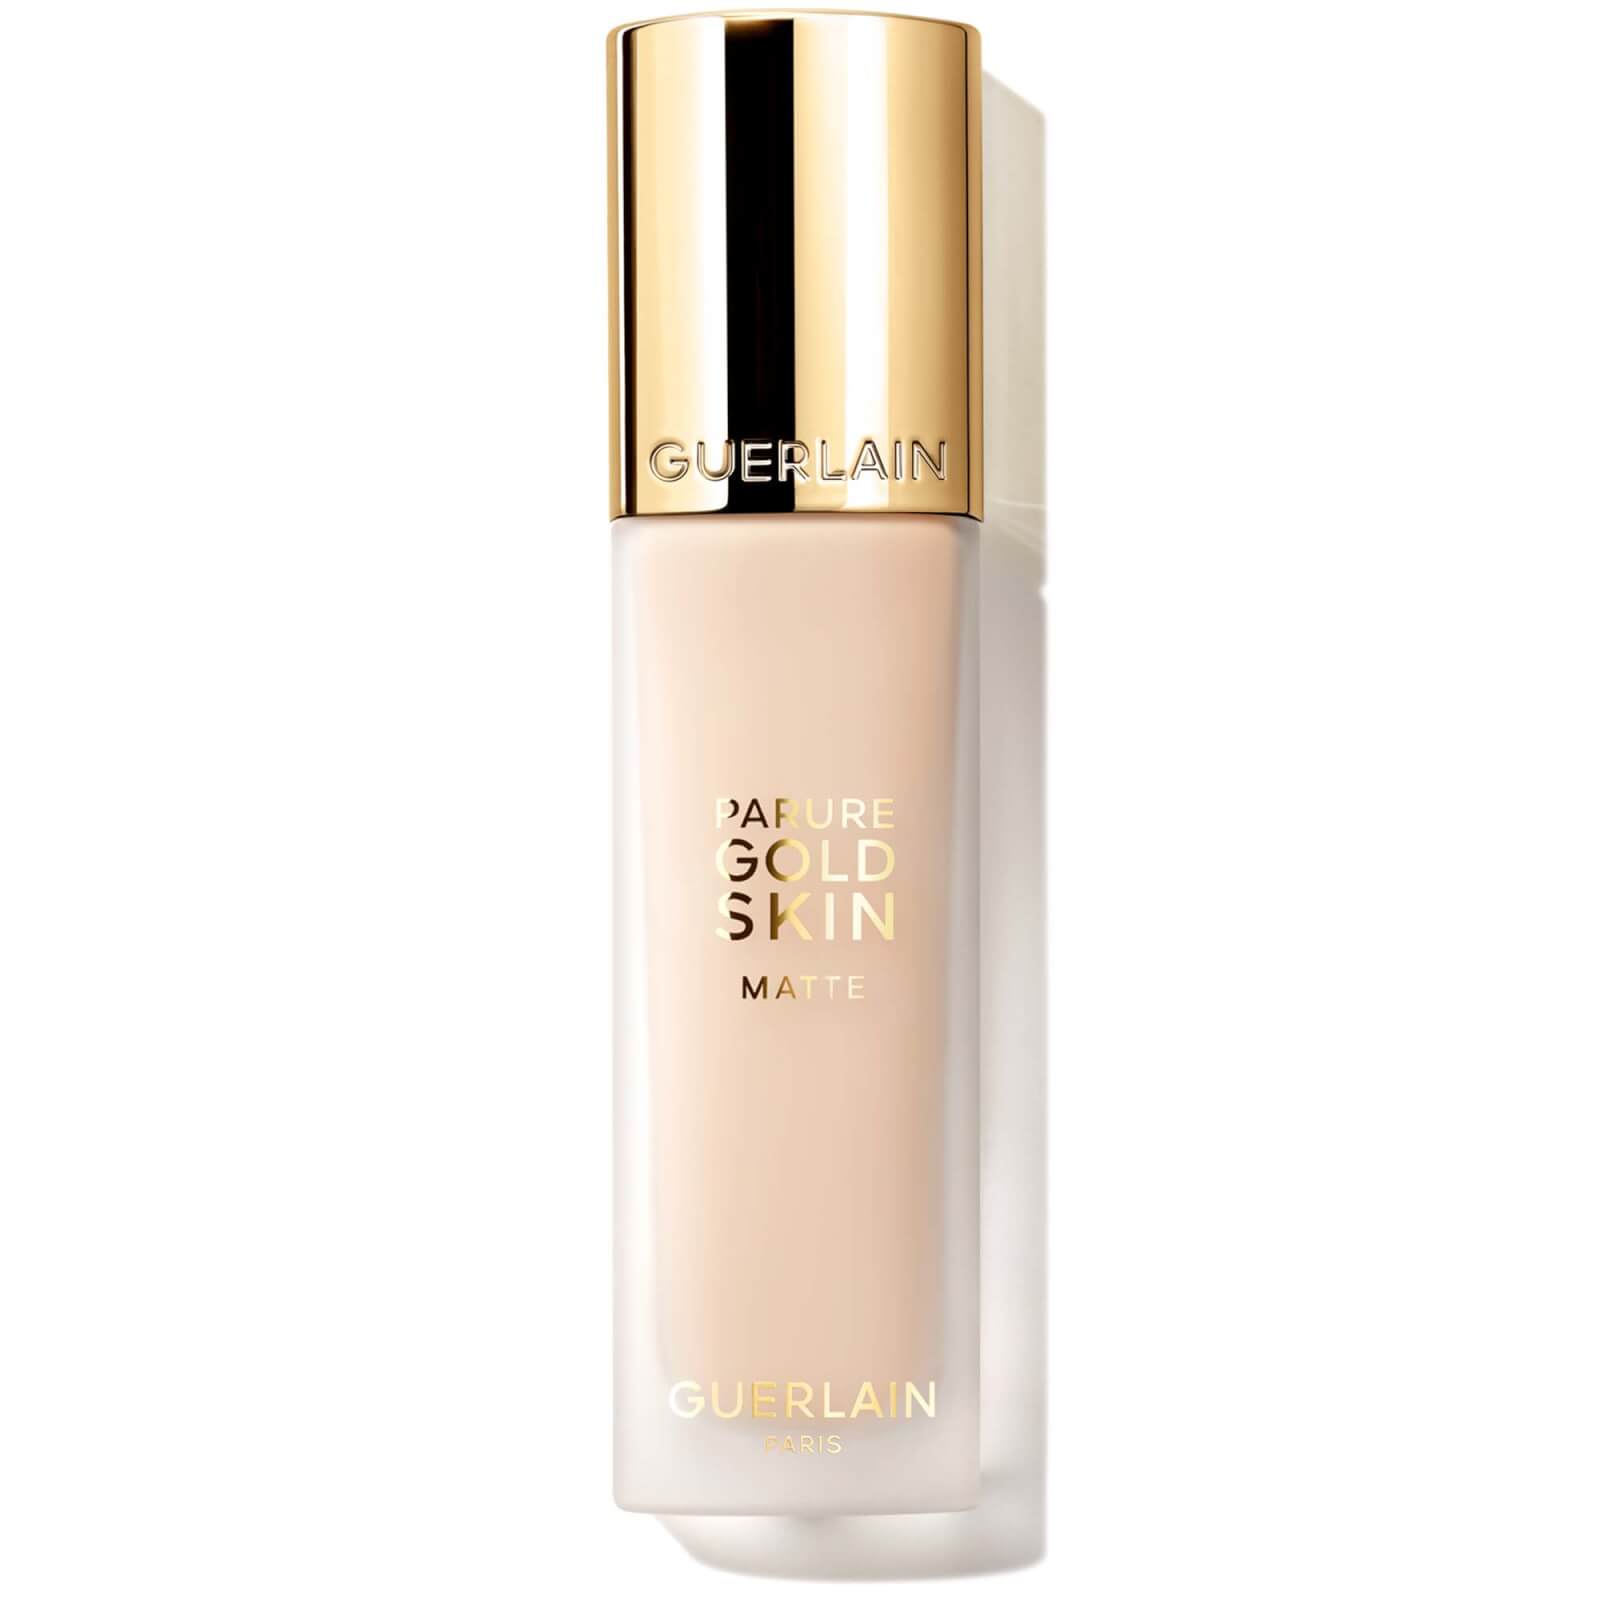 Photos - Other Cosmetics Guerlain Parure Gold Skin 24H No-Transfer High Perfection Foundation 35ml 